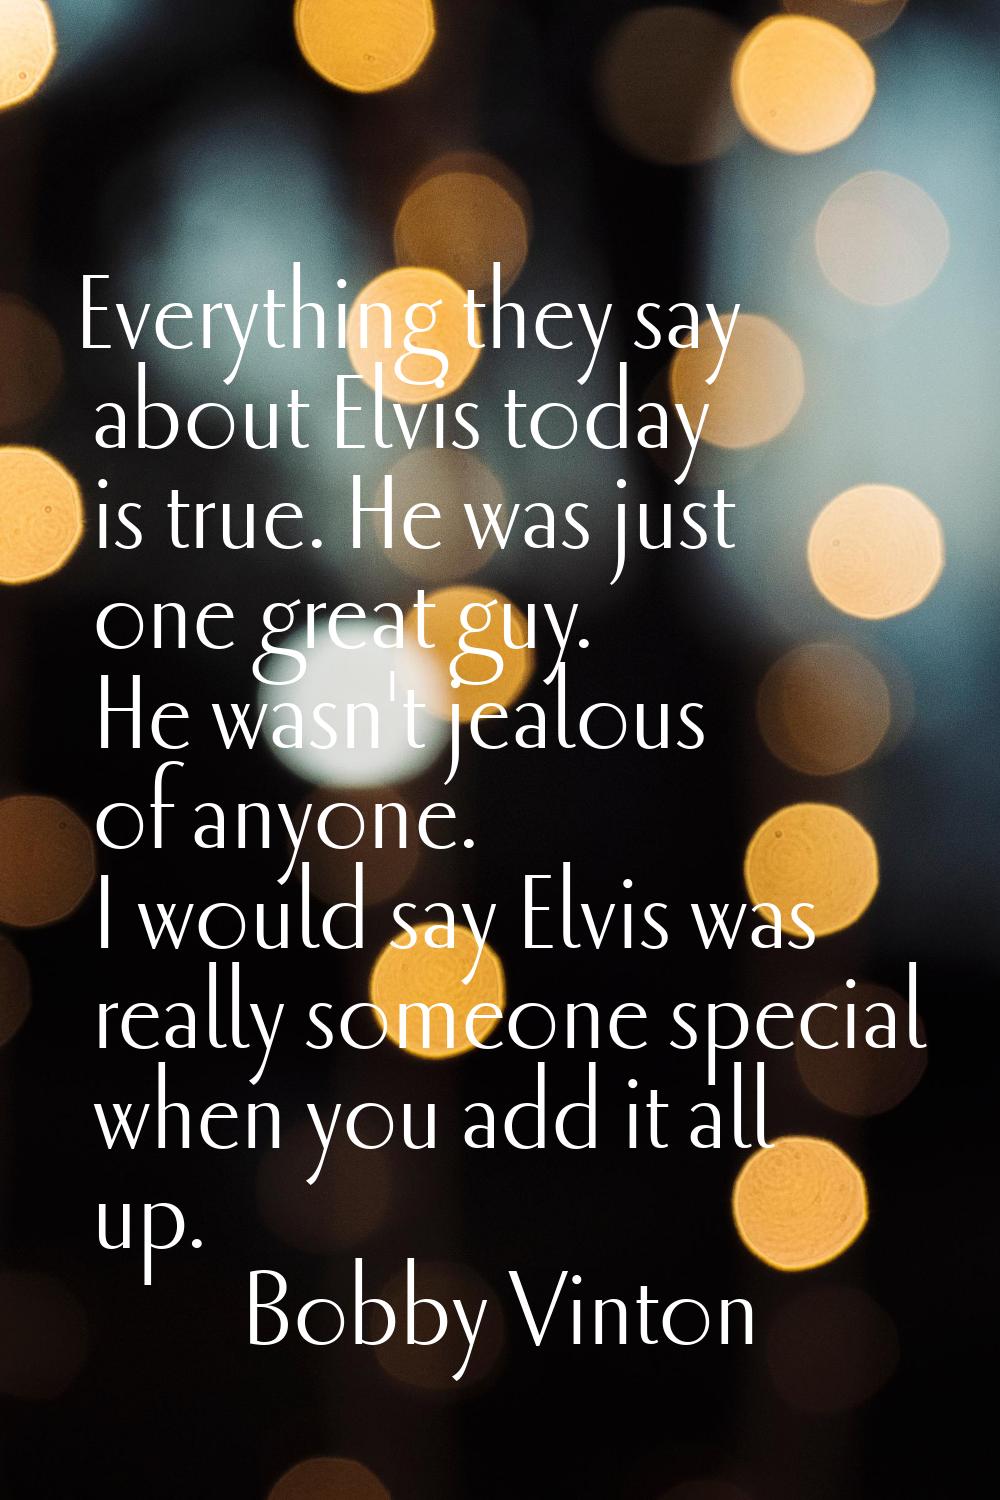 Everything they say about Elvis today is true. He was just one great guy. He wasn't jealous of anyo